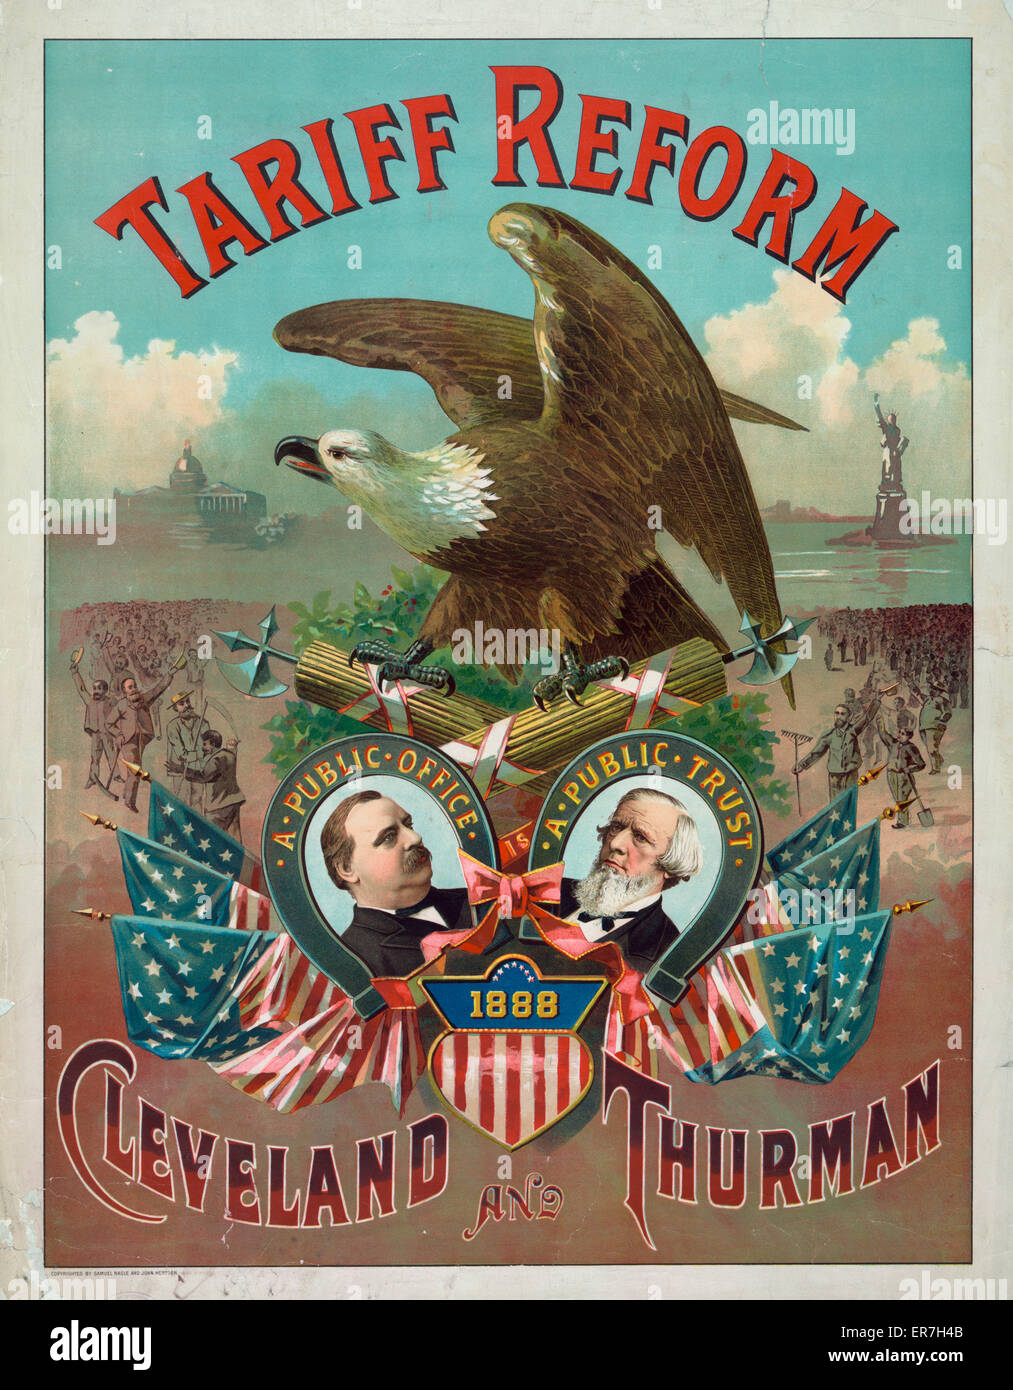 Tariff reform. Cleveland and Thurman. Date c1888 Sept. 17. Stock Photo